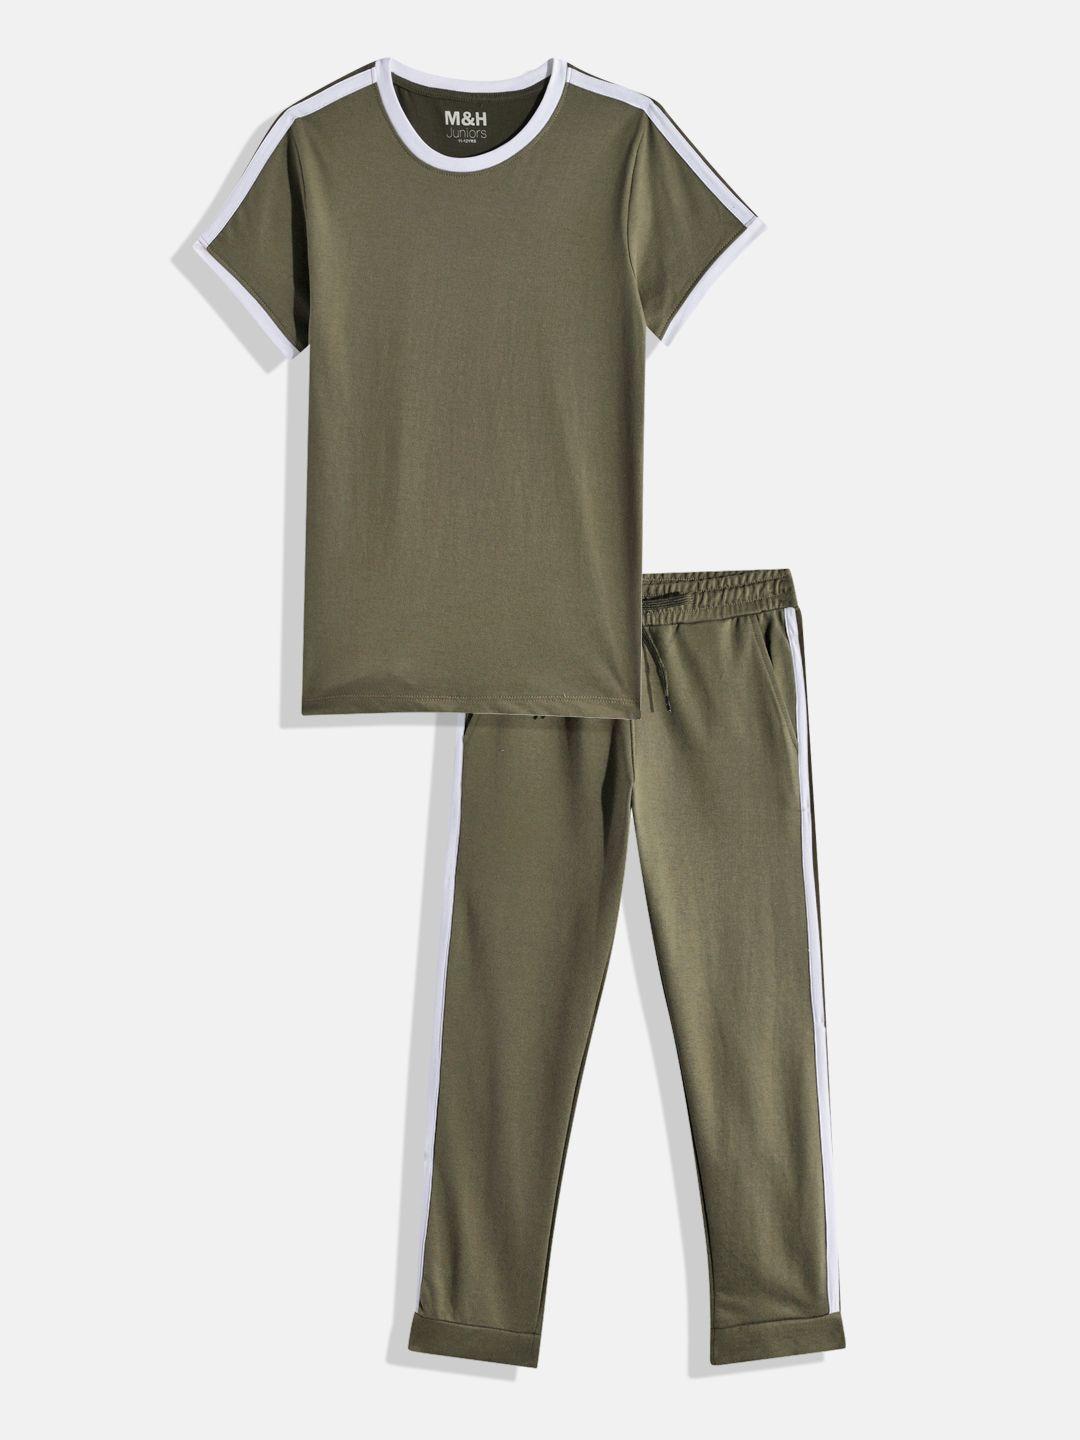 m&h-juniors-boys-olive-green-t-shirt-with-joggers